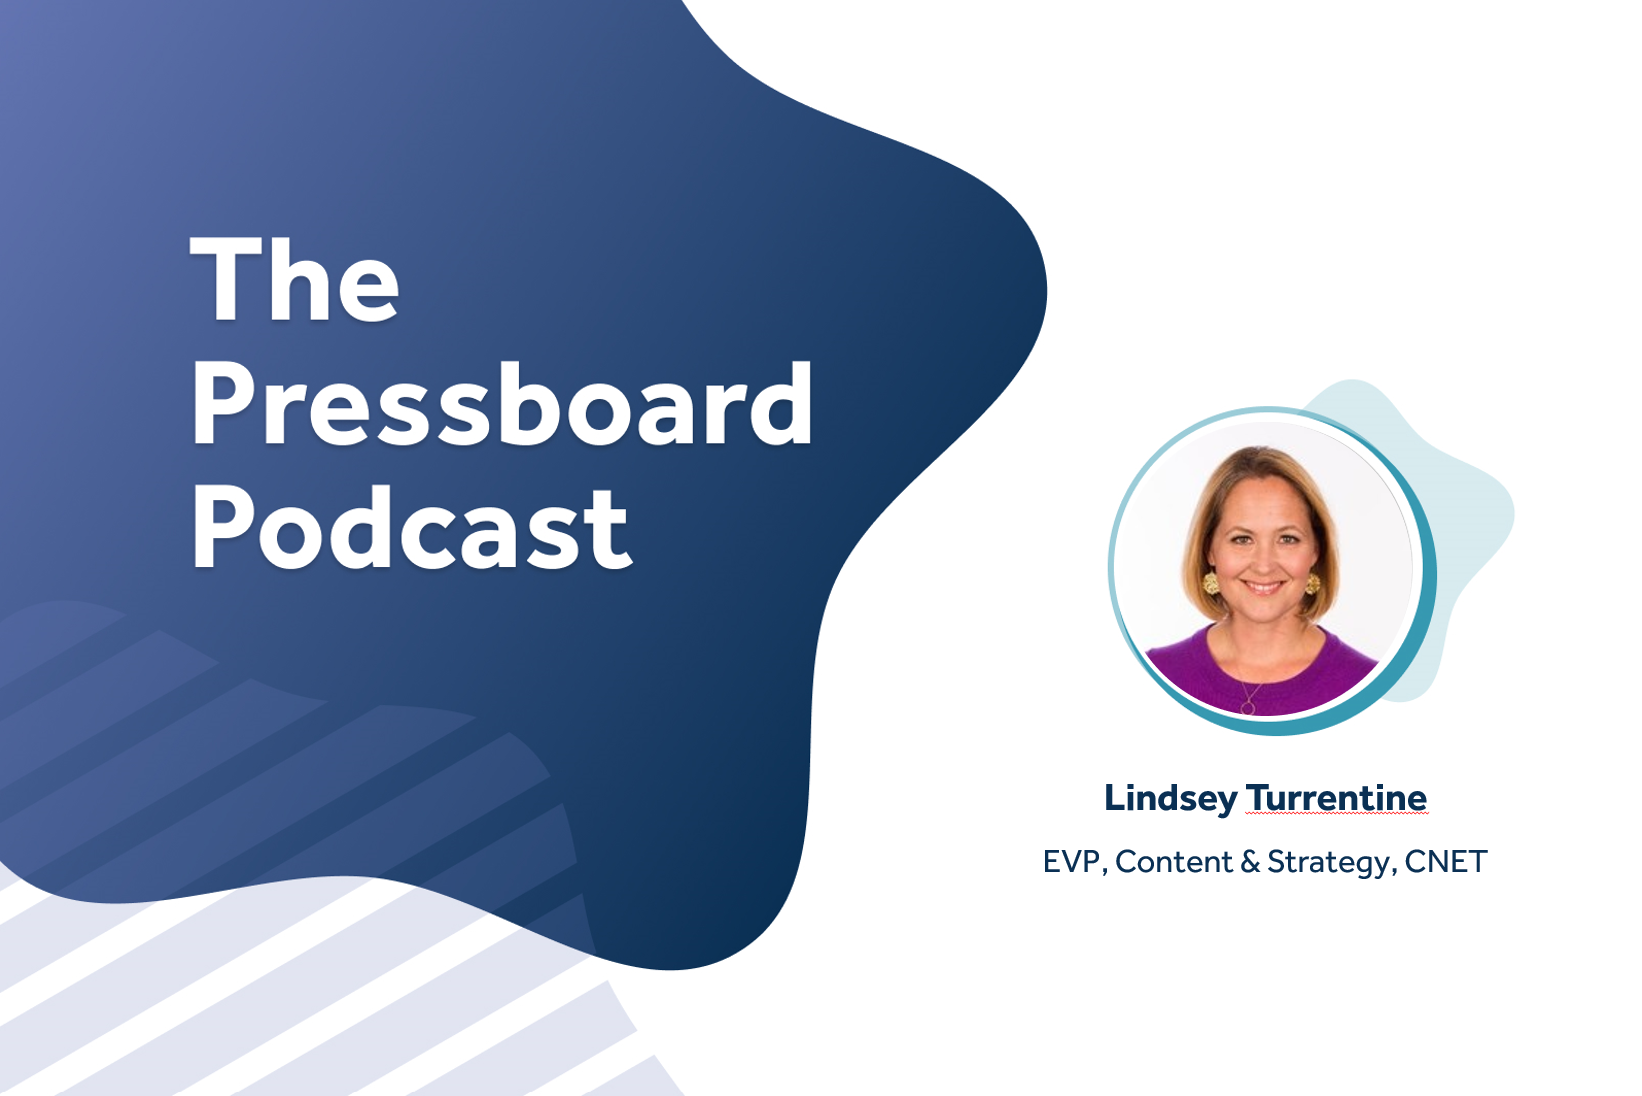 The Past, Present and Future of CNET with Lindsey Turrentine